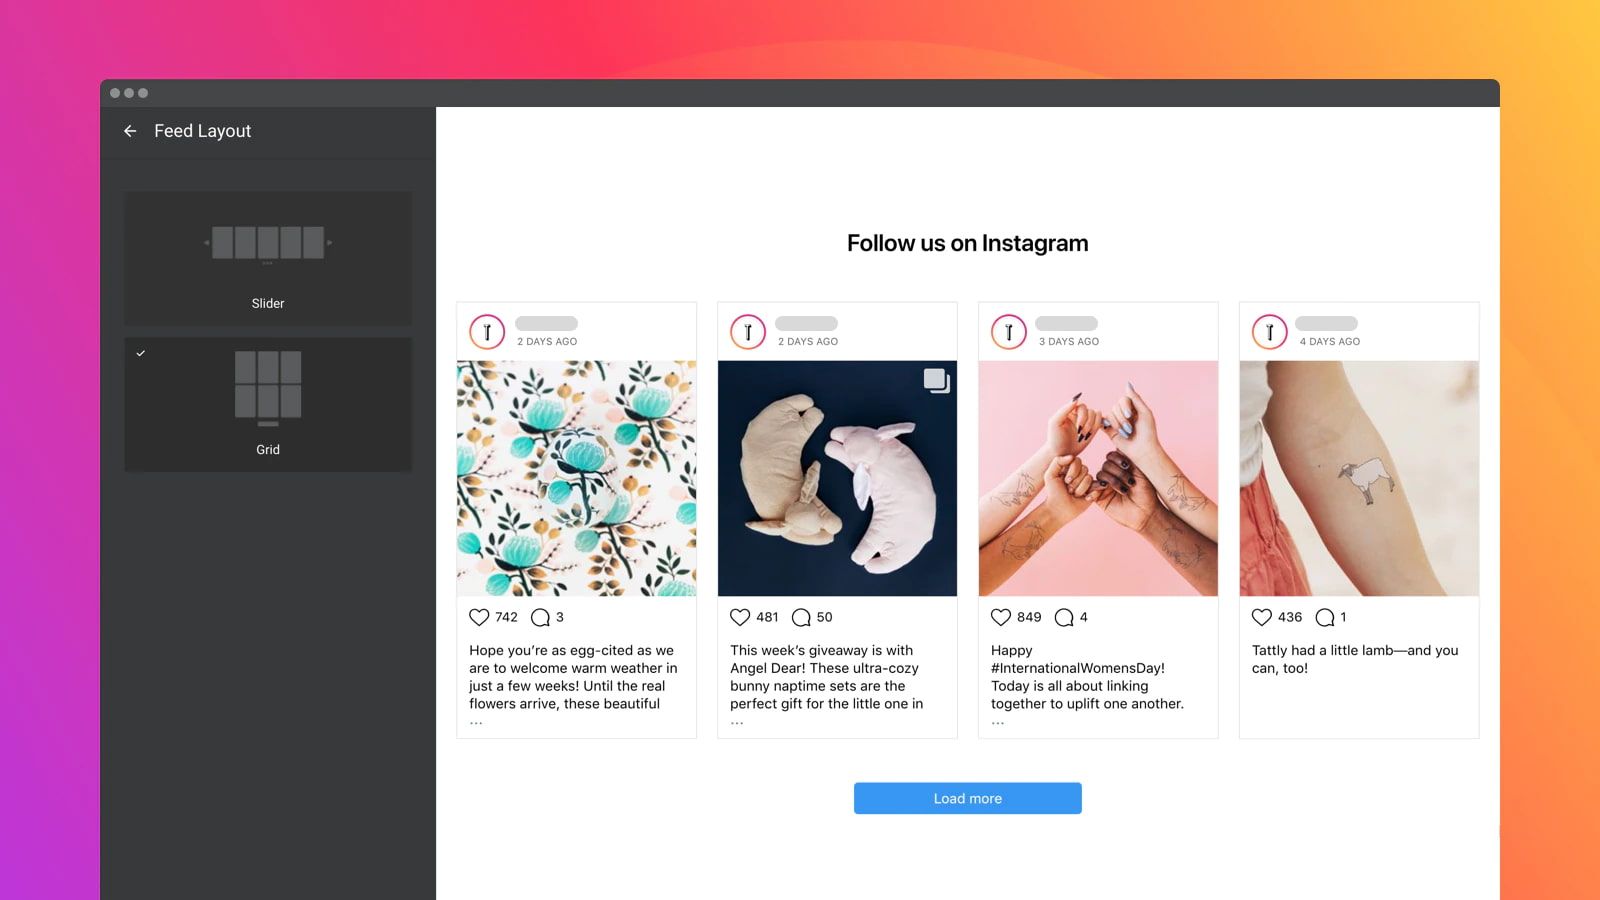 Choose slider or grid layout for the Instagram feed